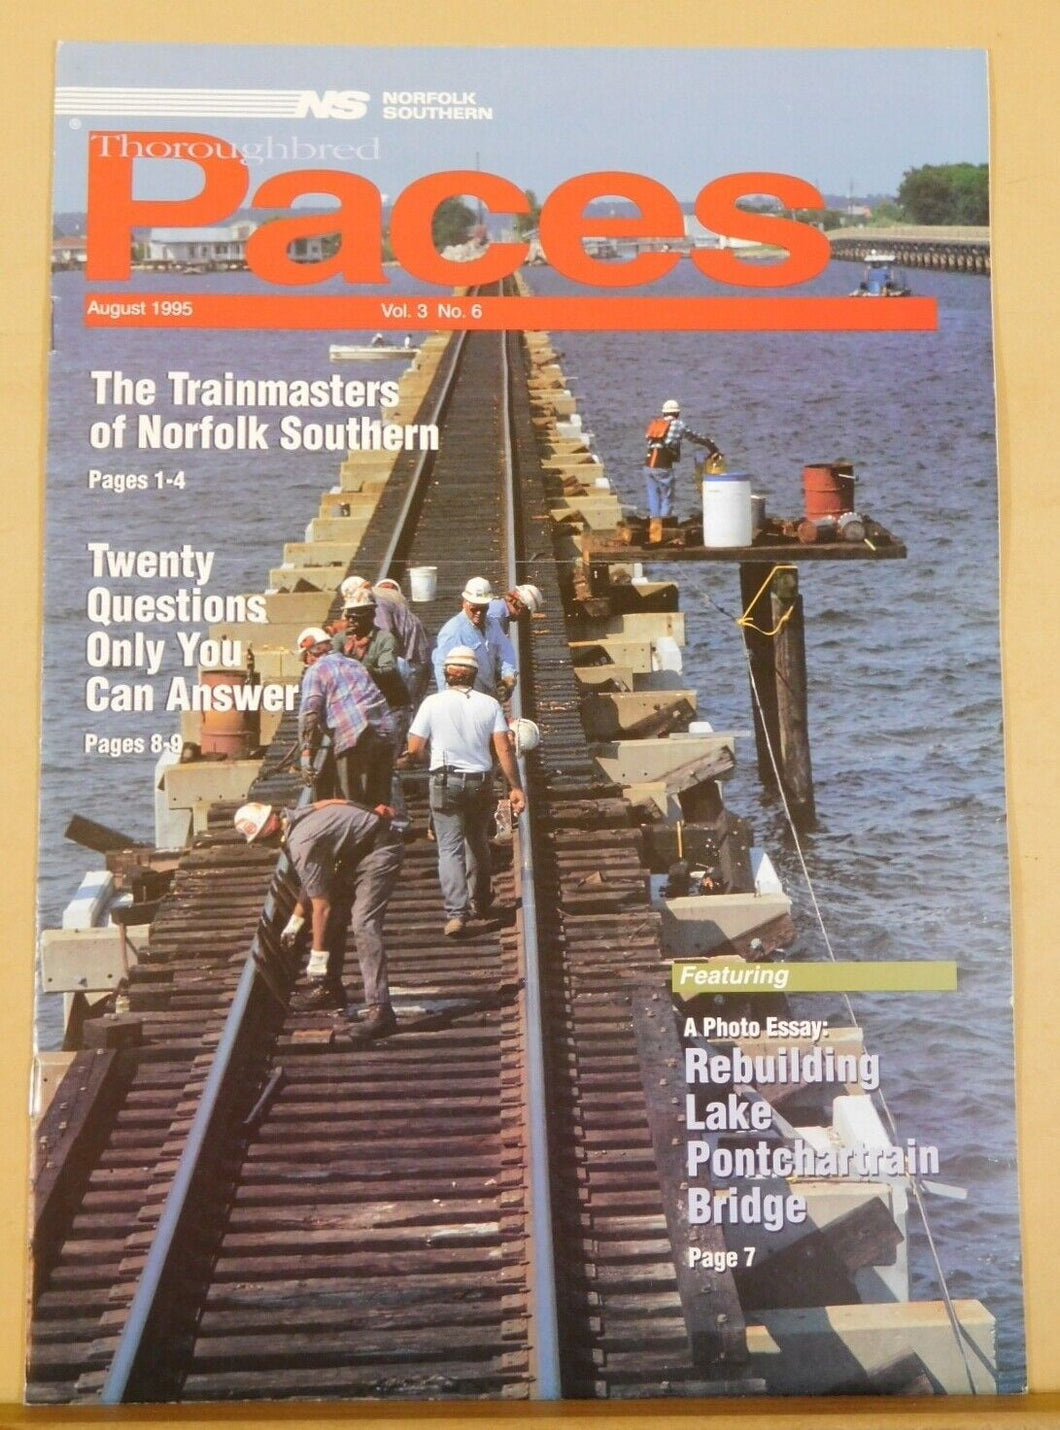 Norfolk Southern Thoroughbred Paces Employee Magazine Vol 3 #6 1995 August